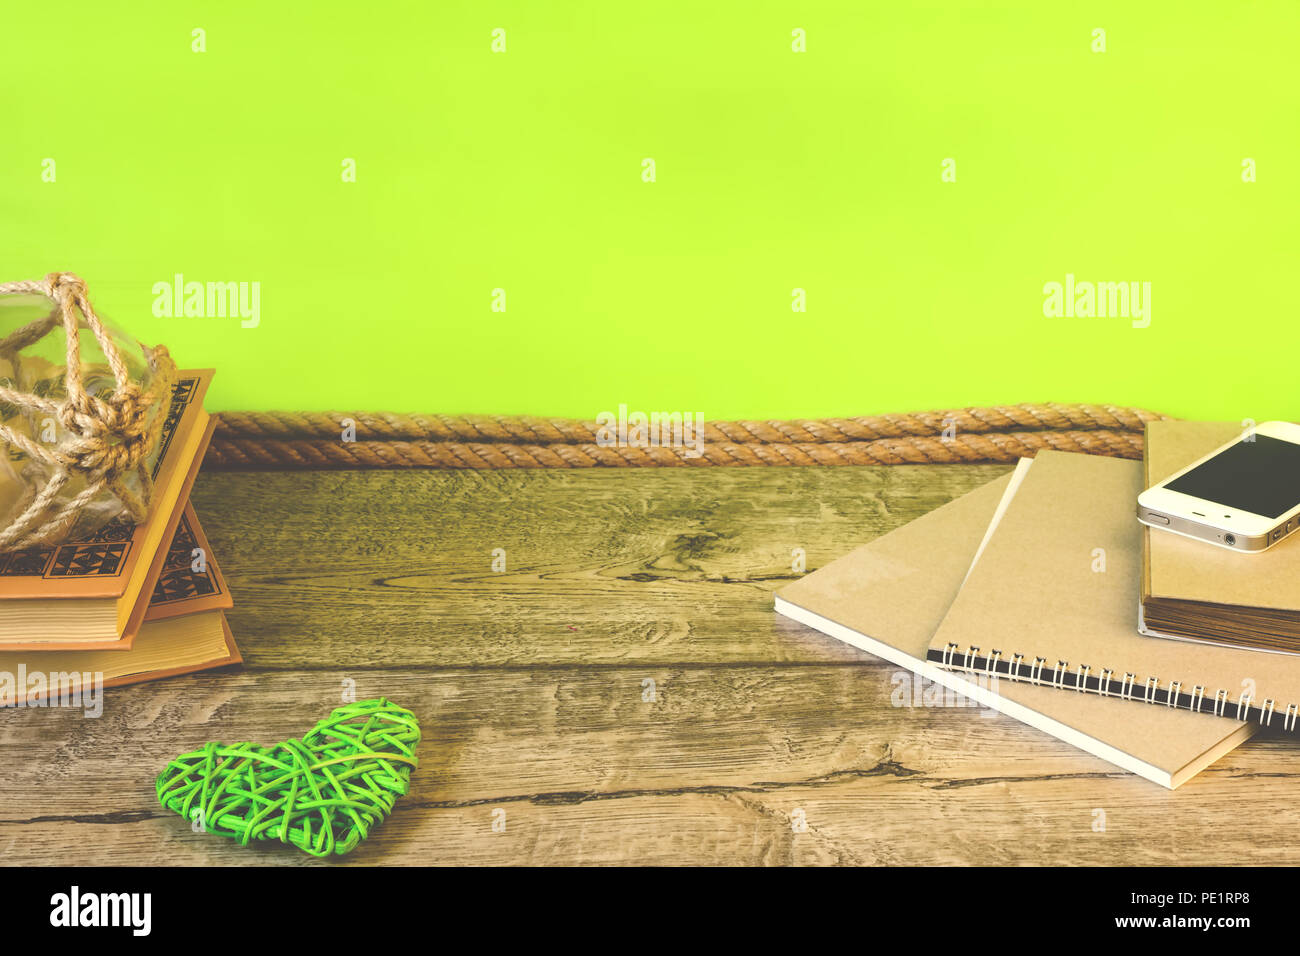 School notebooks, pencils and other items on green and wooden background Stock Photo